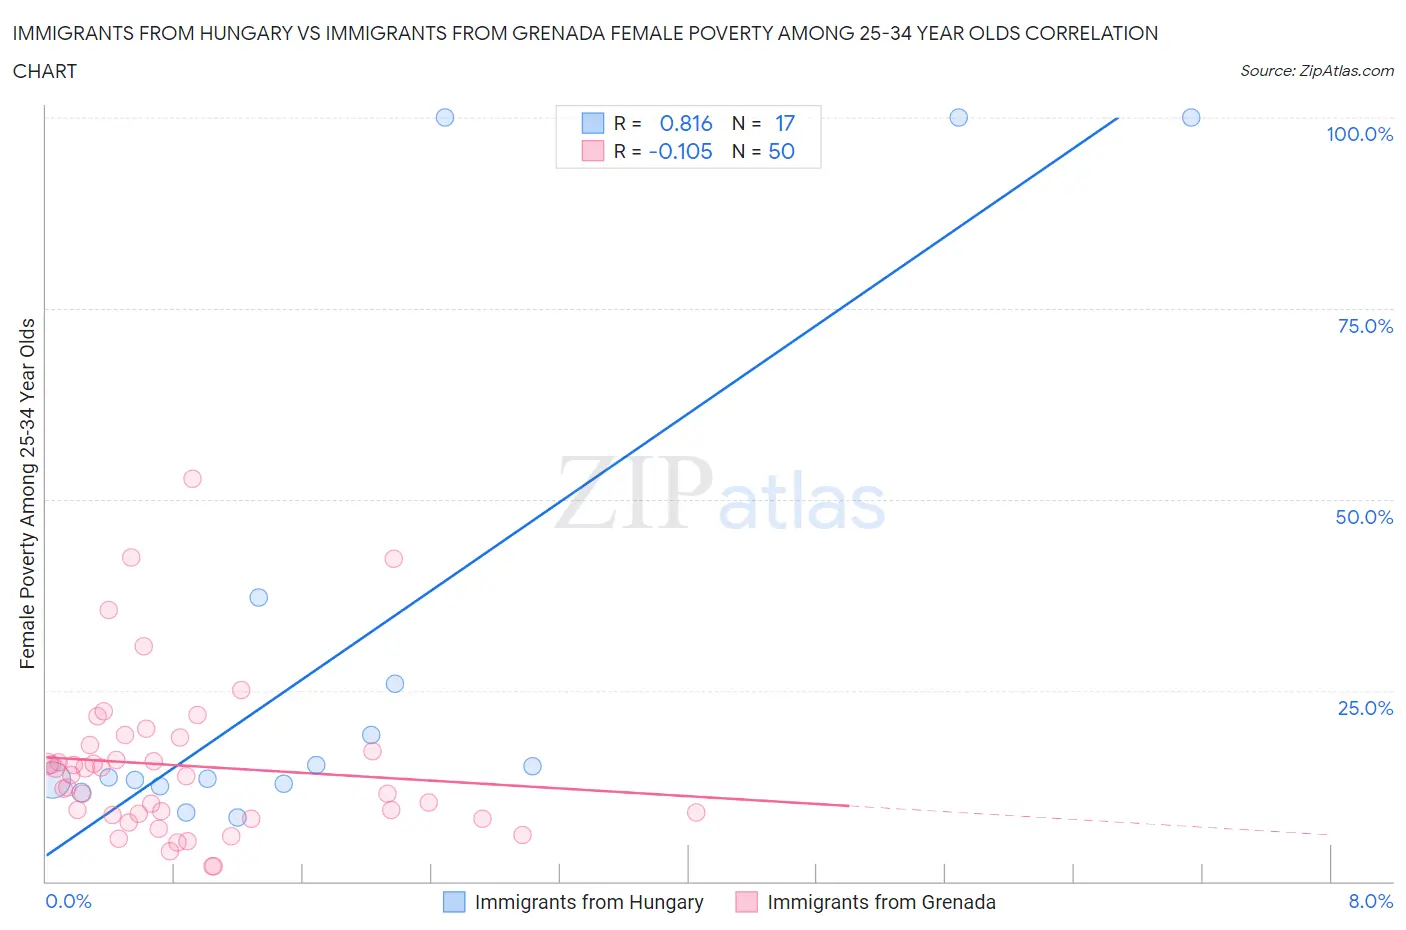 Immigrants from Hungary vs Immigrants from Grenada Female Poverty Among 25-34 Year Olds